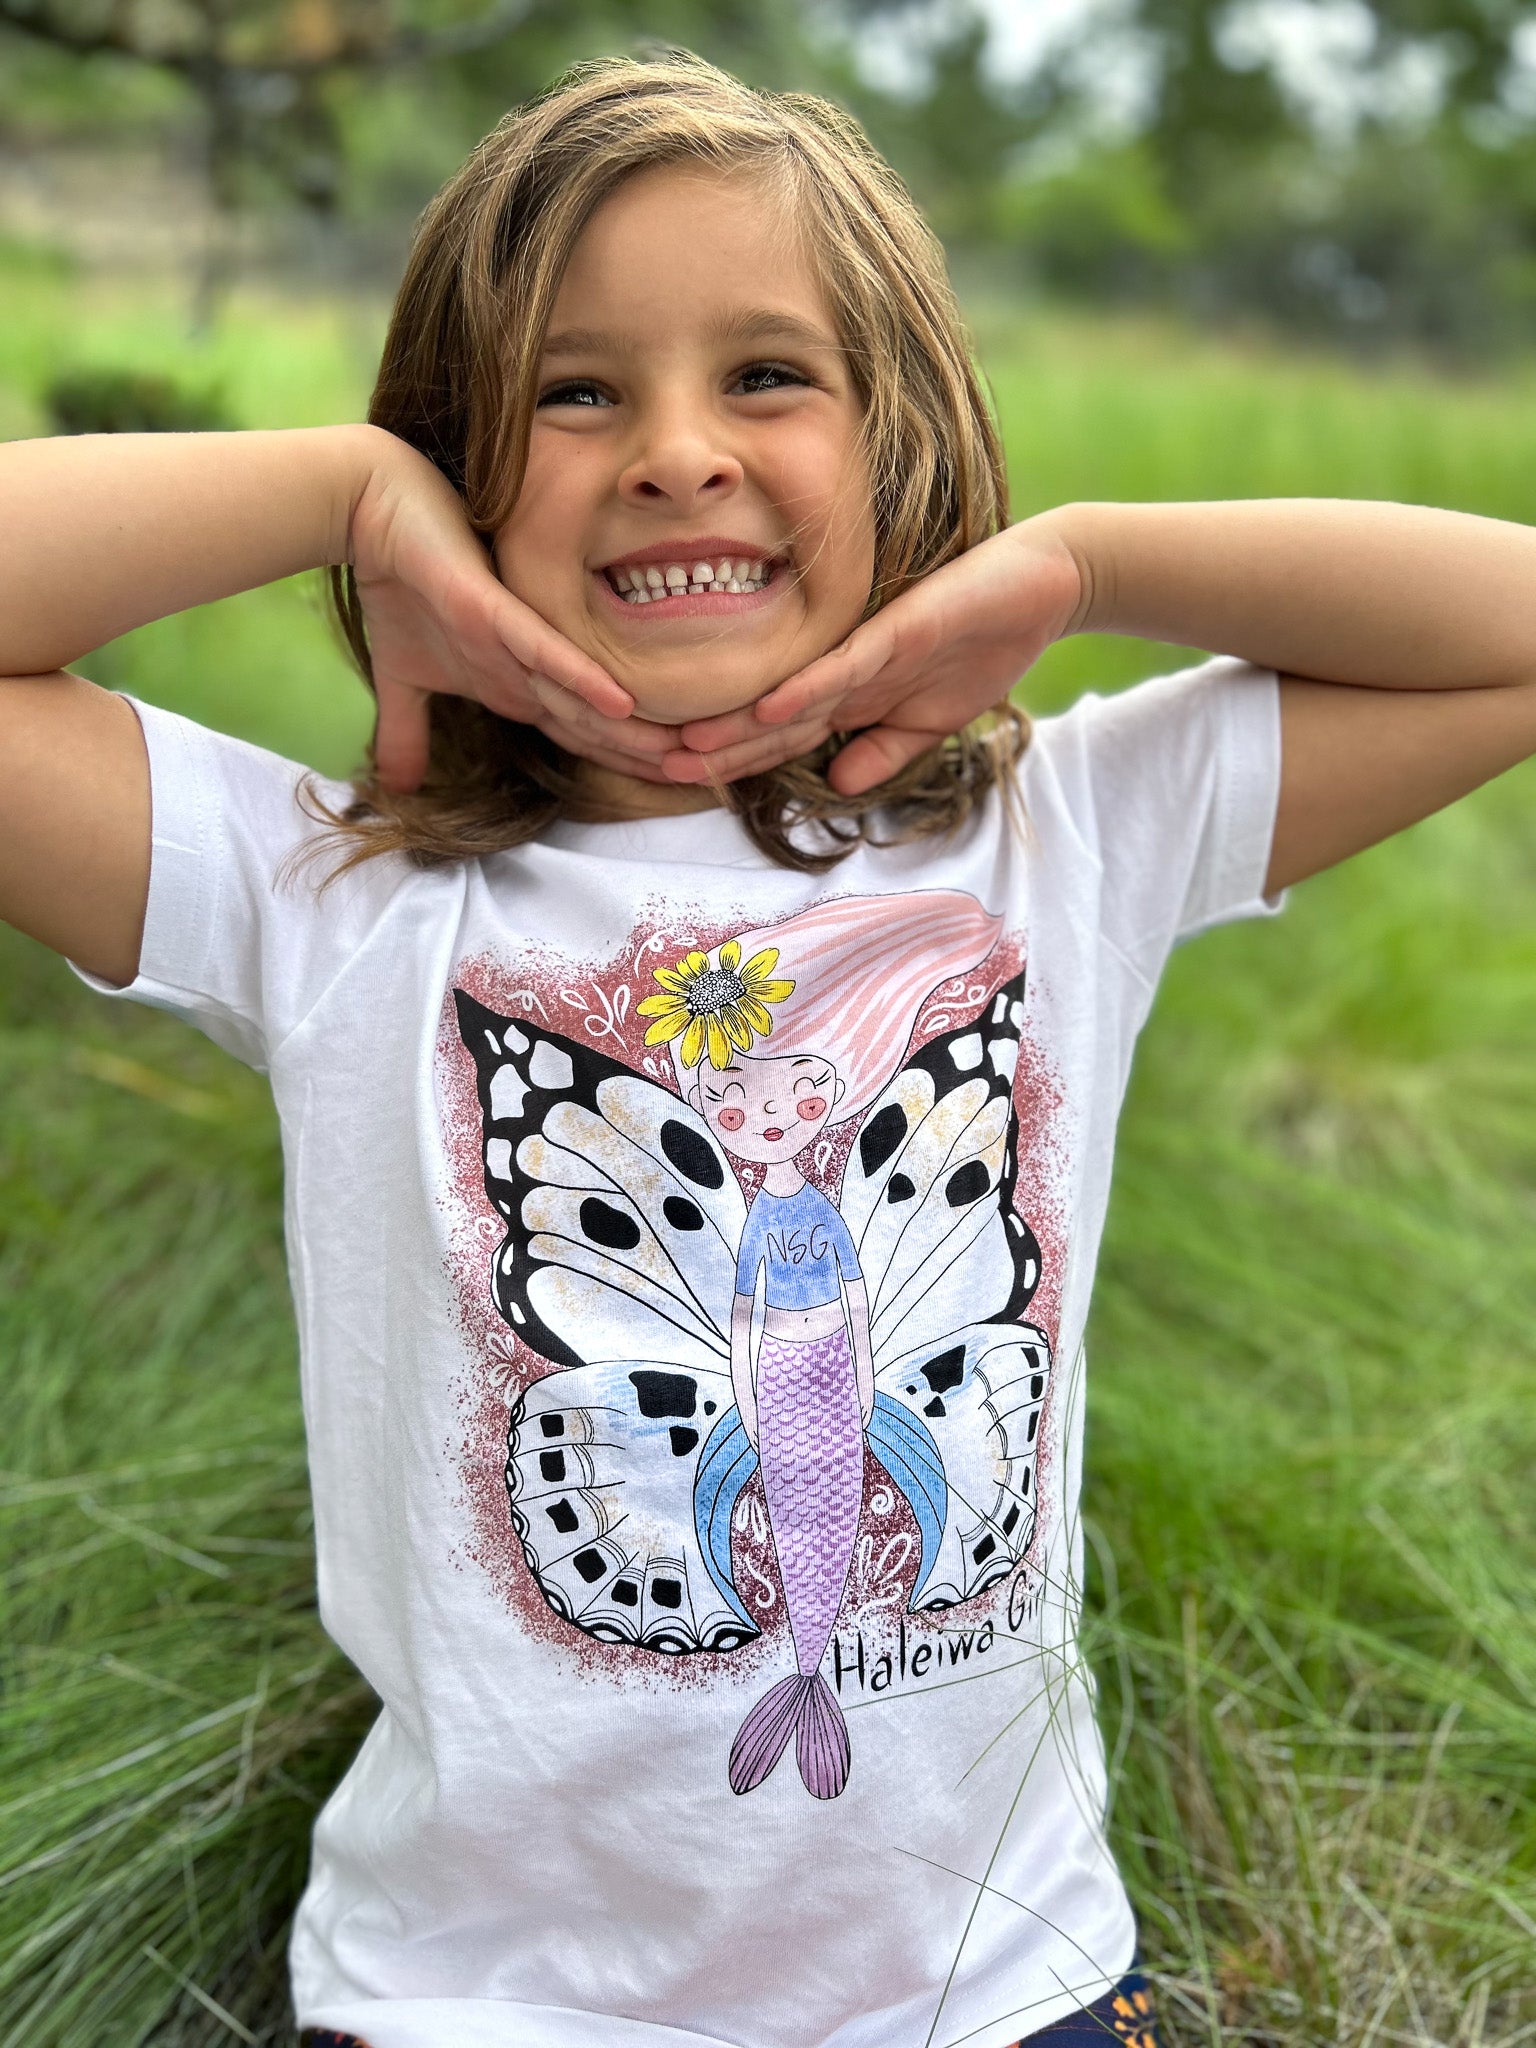 North Shore Girls Tee Collection for kids. Handmade in California Mermaid Haleiwa town mermaid butterfly. A perfect gift for the mermaid lover in your life.